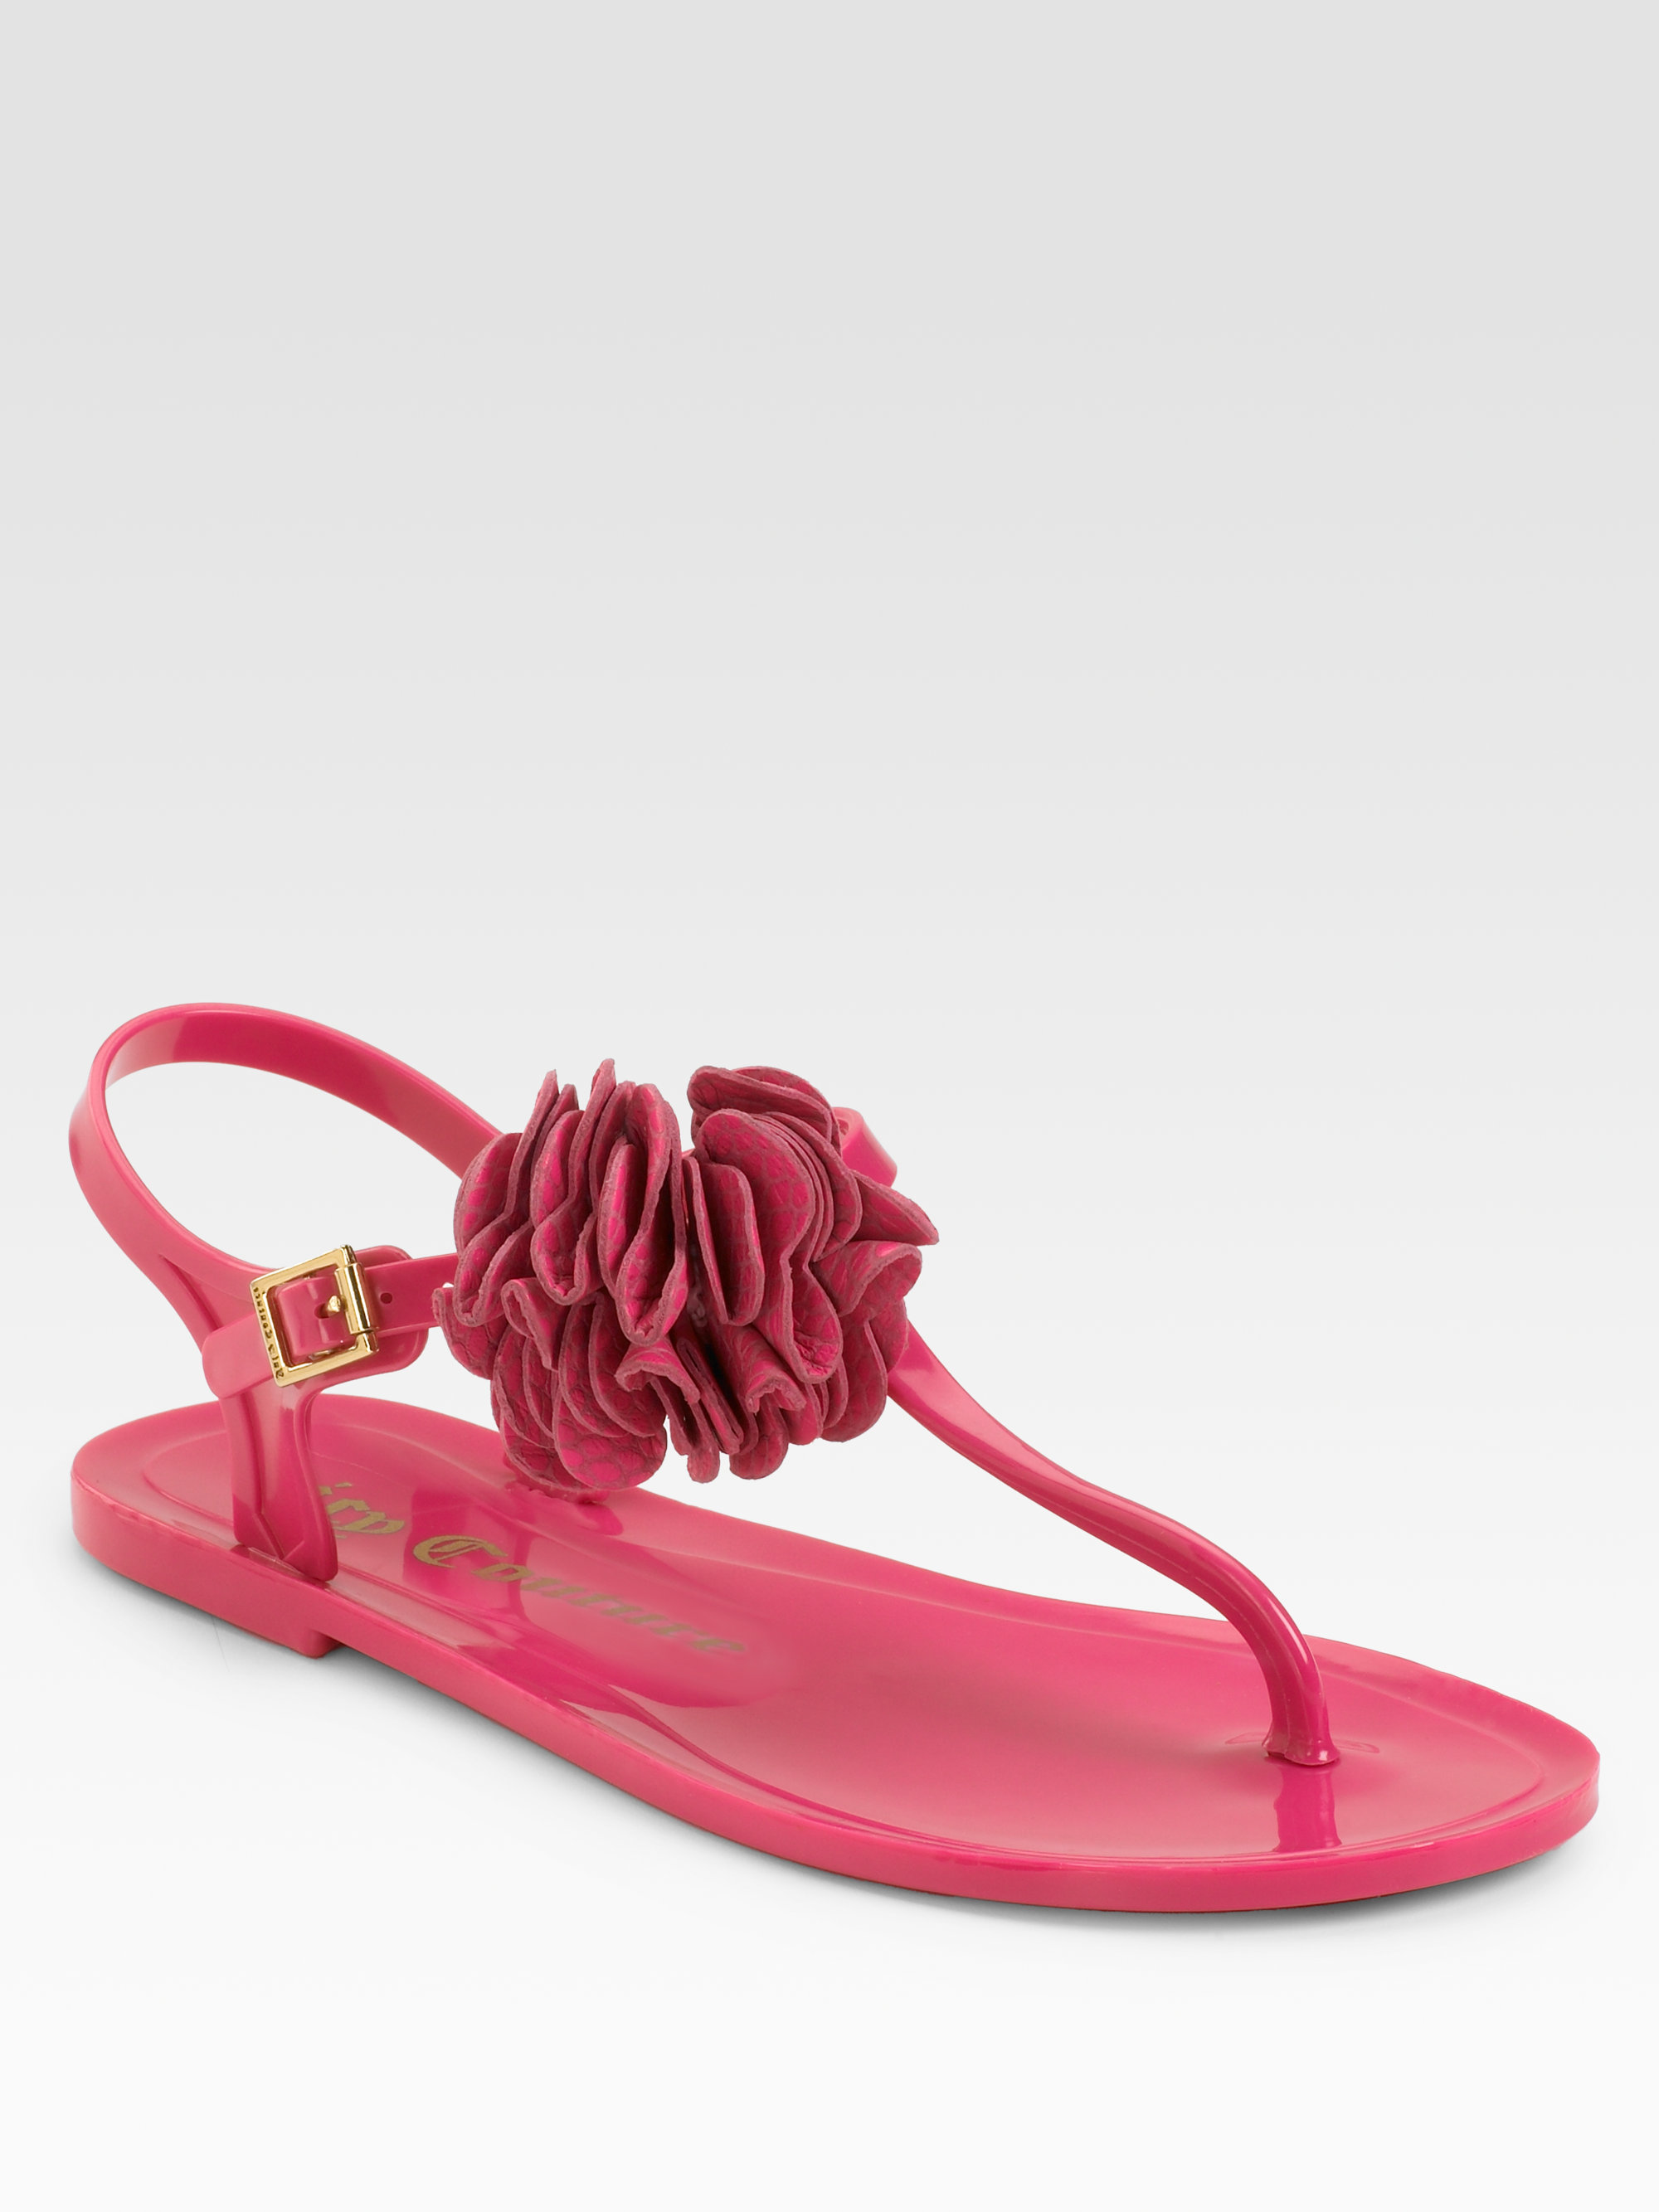 Juicy couture Flower Thong Sandals in Pink | Lyst